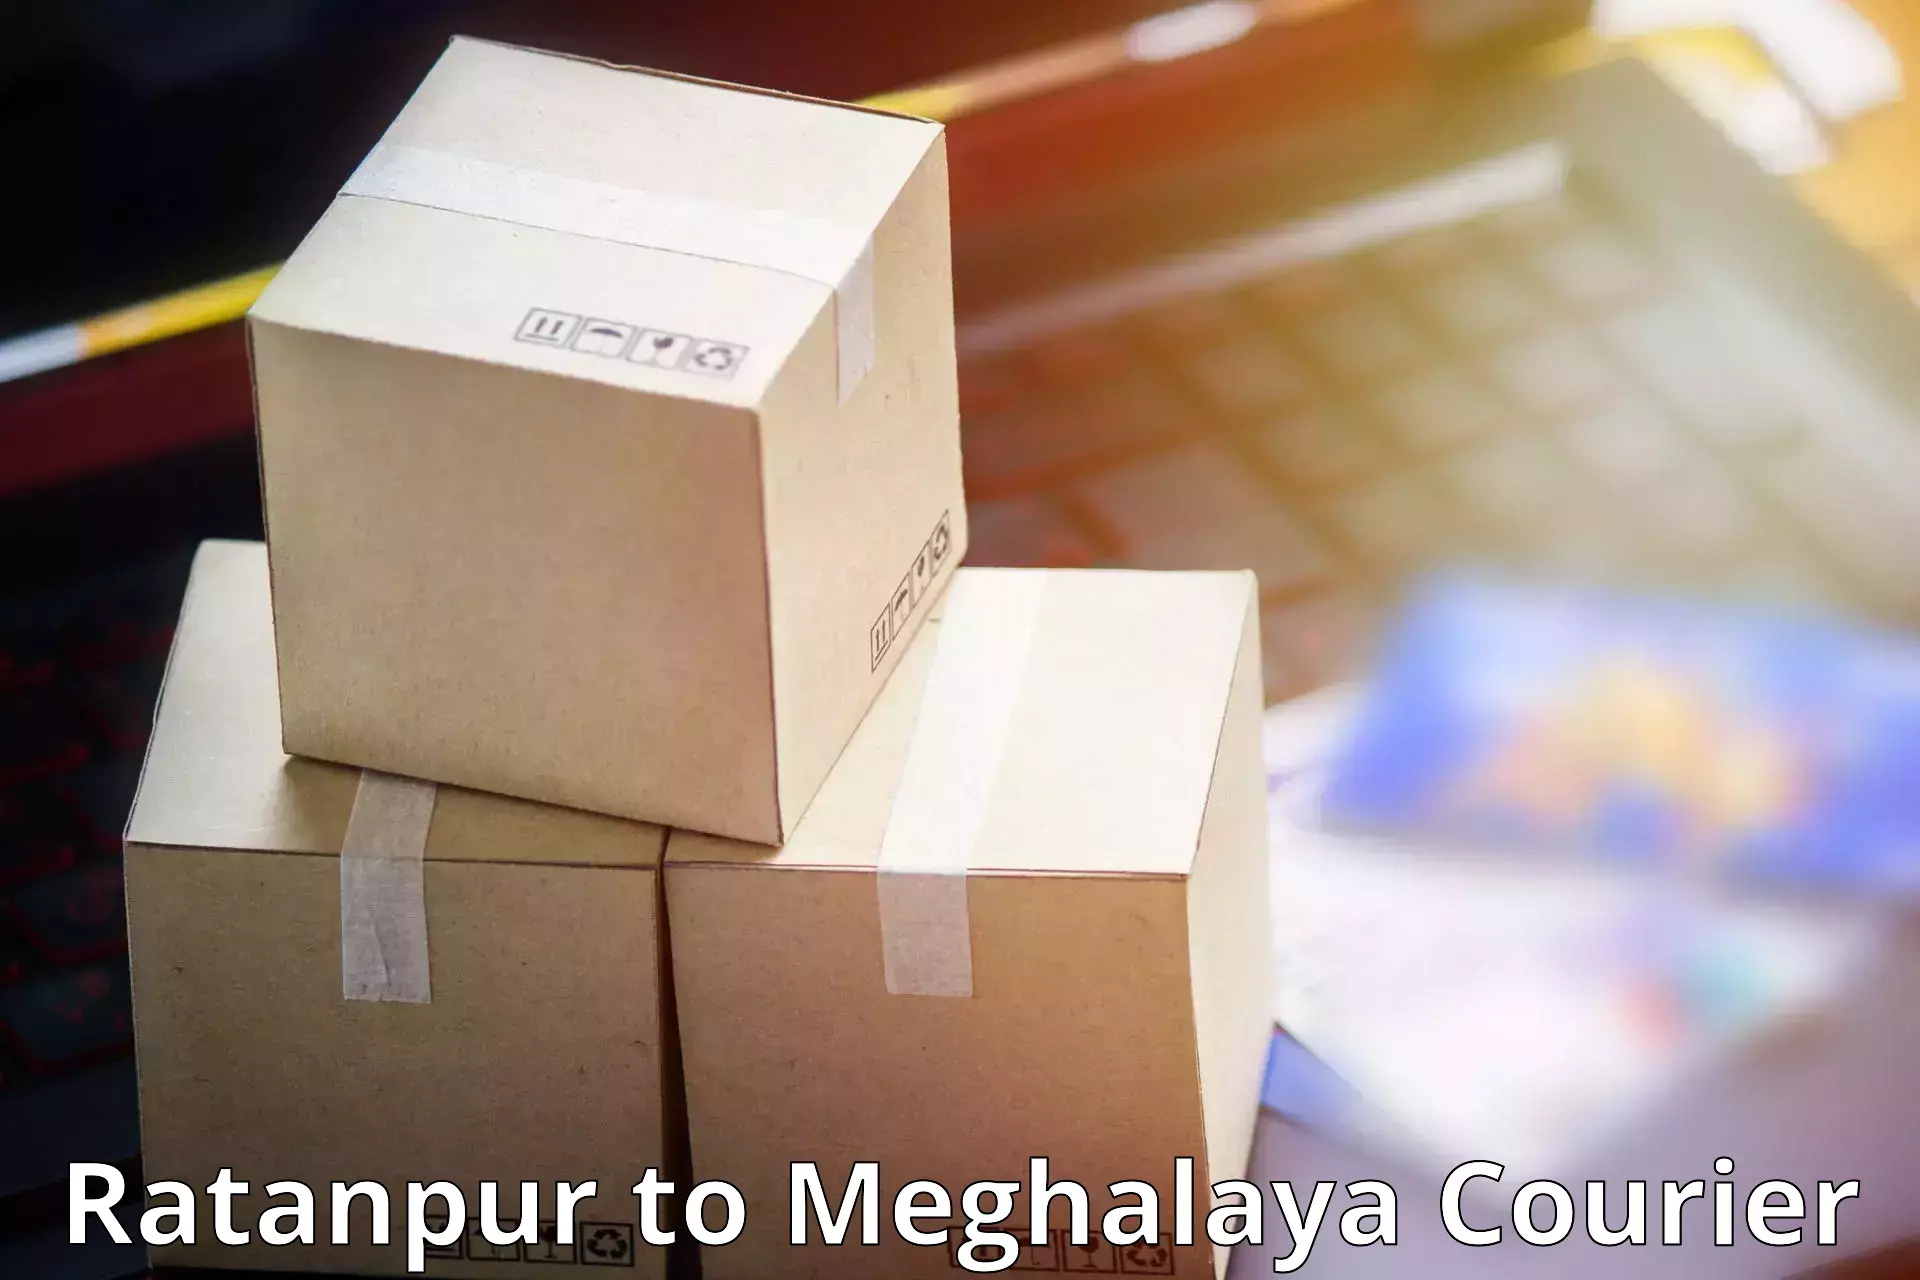 Speedy delivery service Ratanpur to Meghalaya